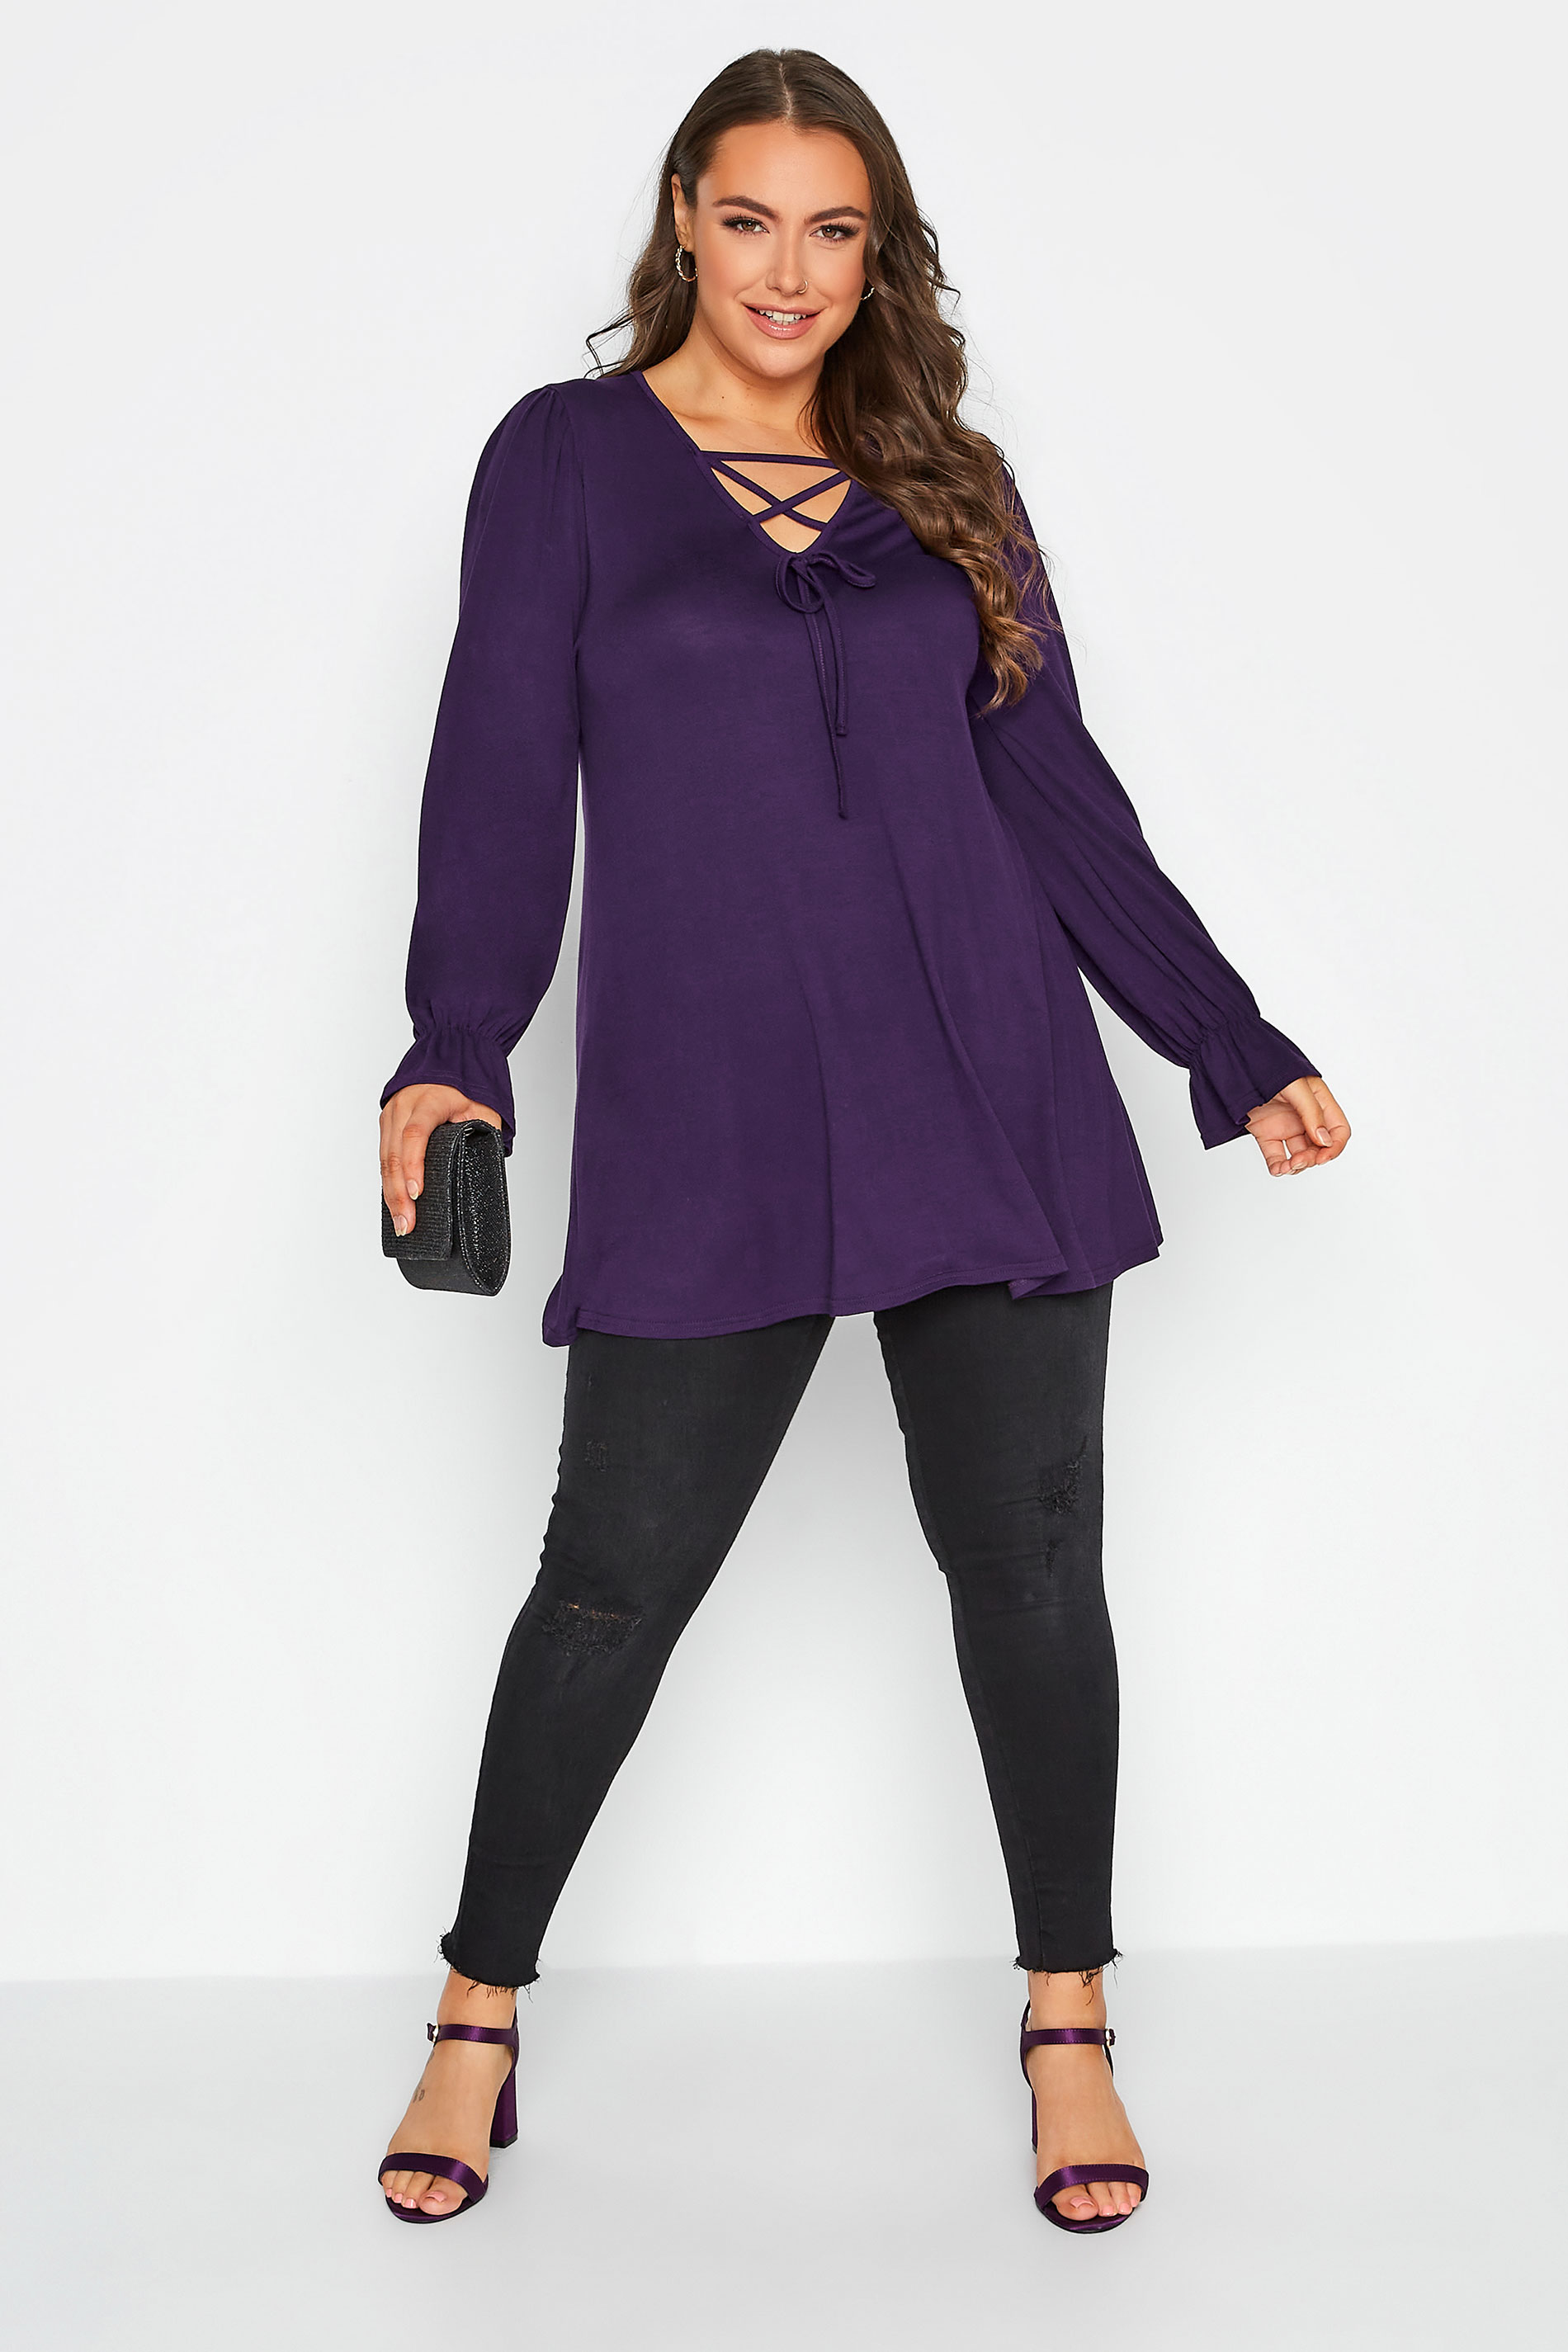 LIMITED COLLECTION Plus Size Purple Lattice Front Top | Yours Clothing 2